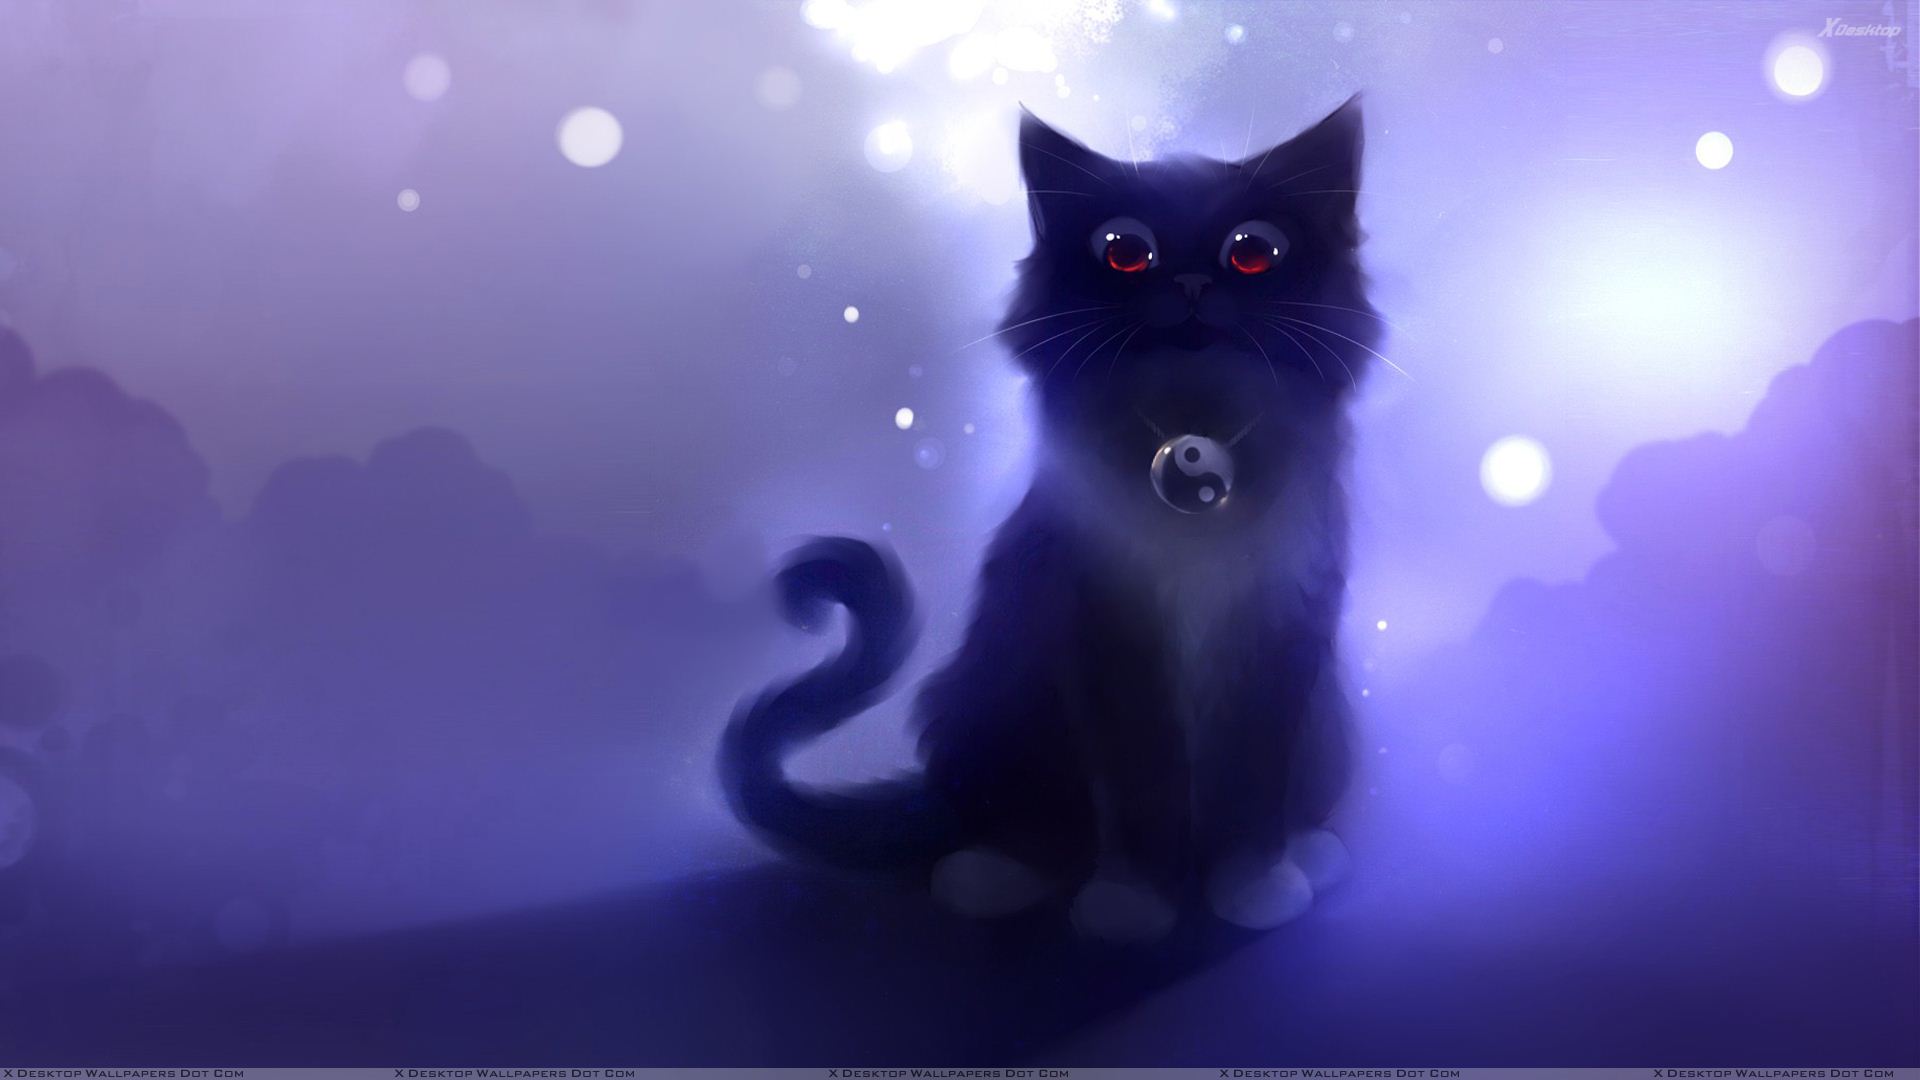 Black Cats Wallpapers Photos Images in HD